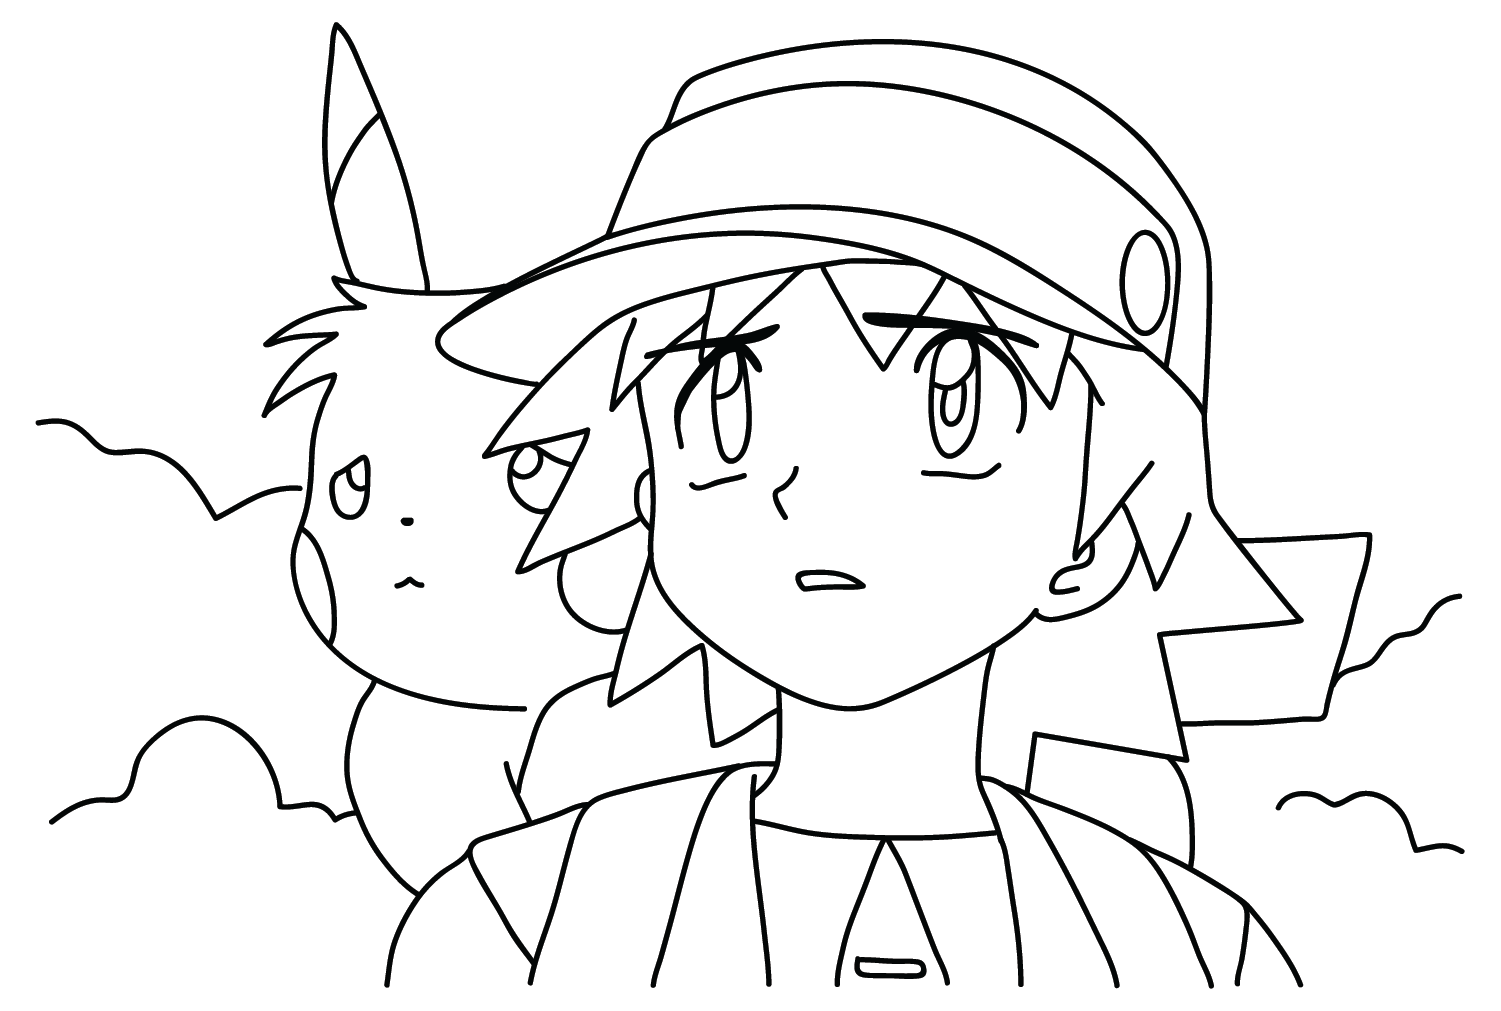 Pikachu and Ritchie Images to Color